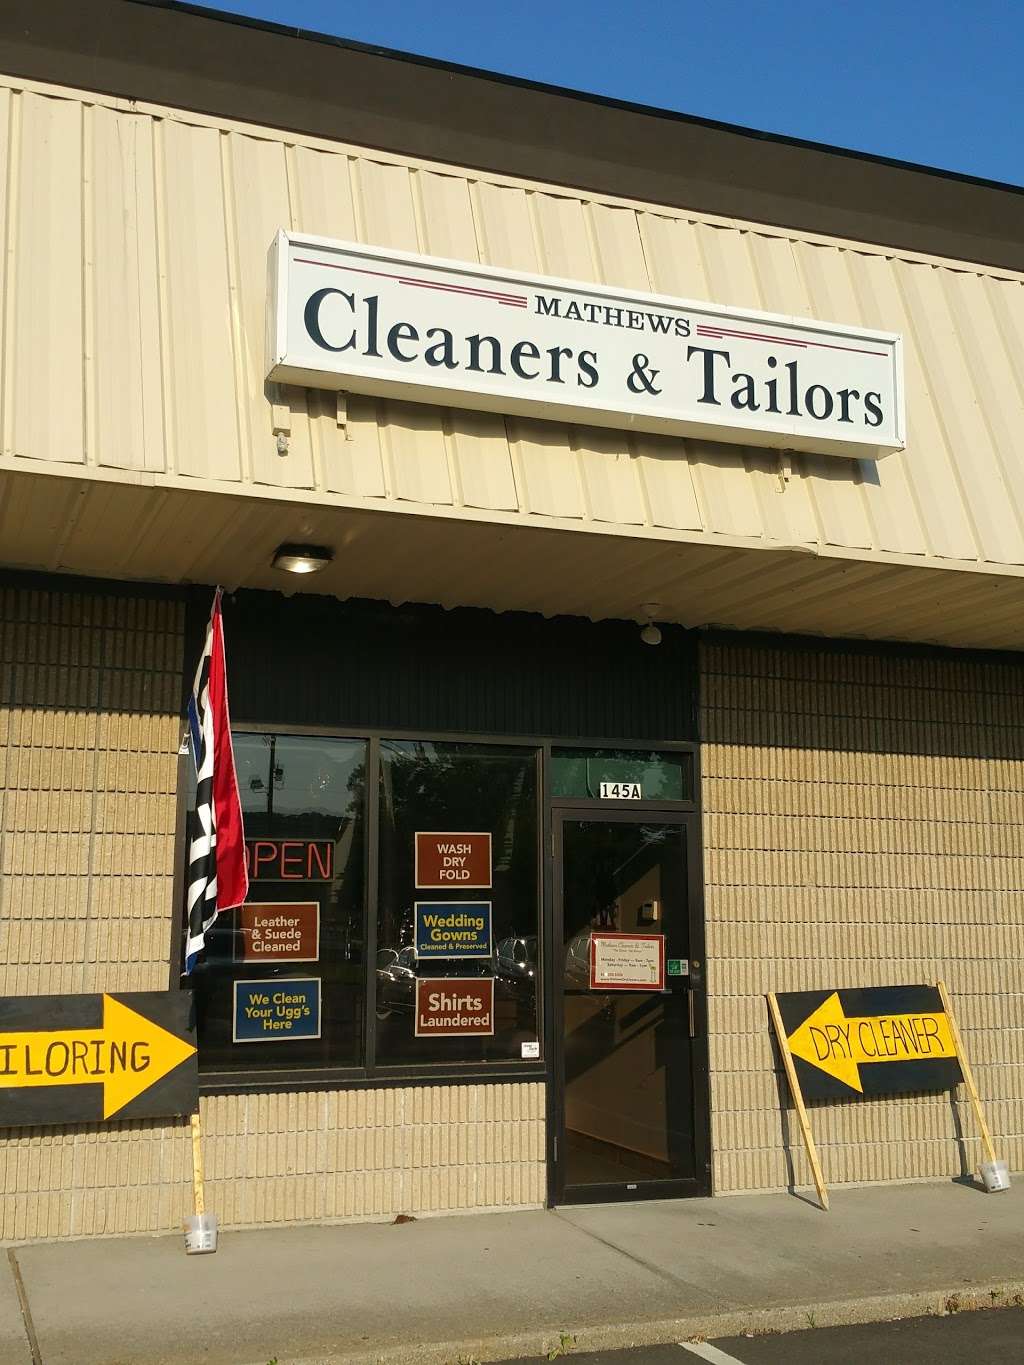 Mathews Cleaners & Tailors | 145 A Danbury Rd, New Milford, CT 06776 | Phone: (860) 355-5326